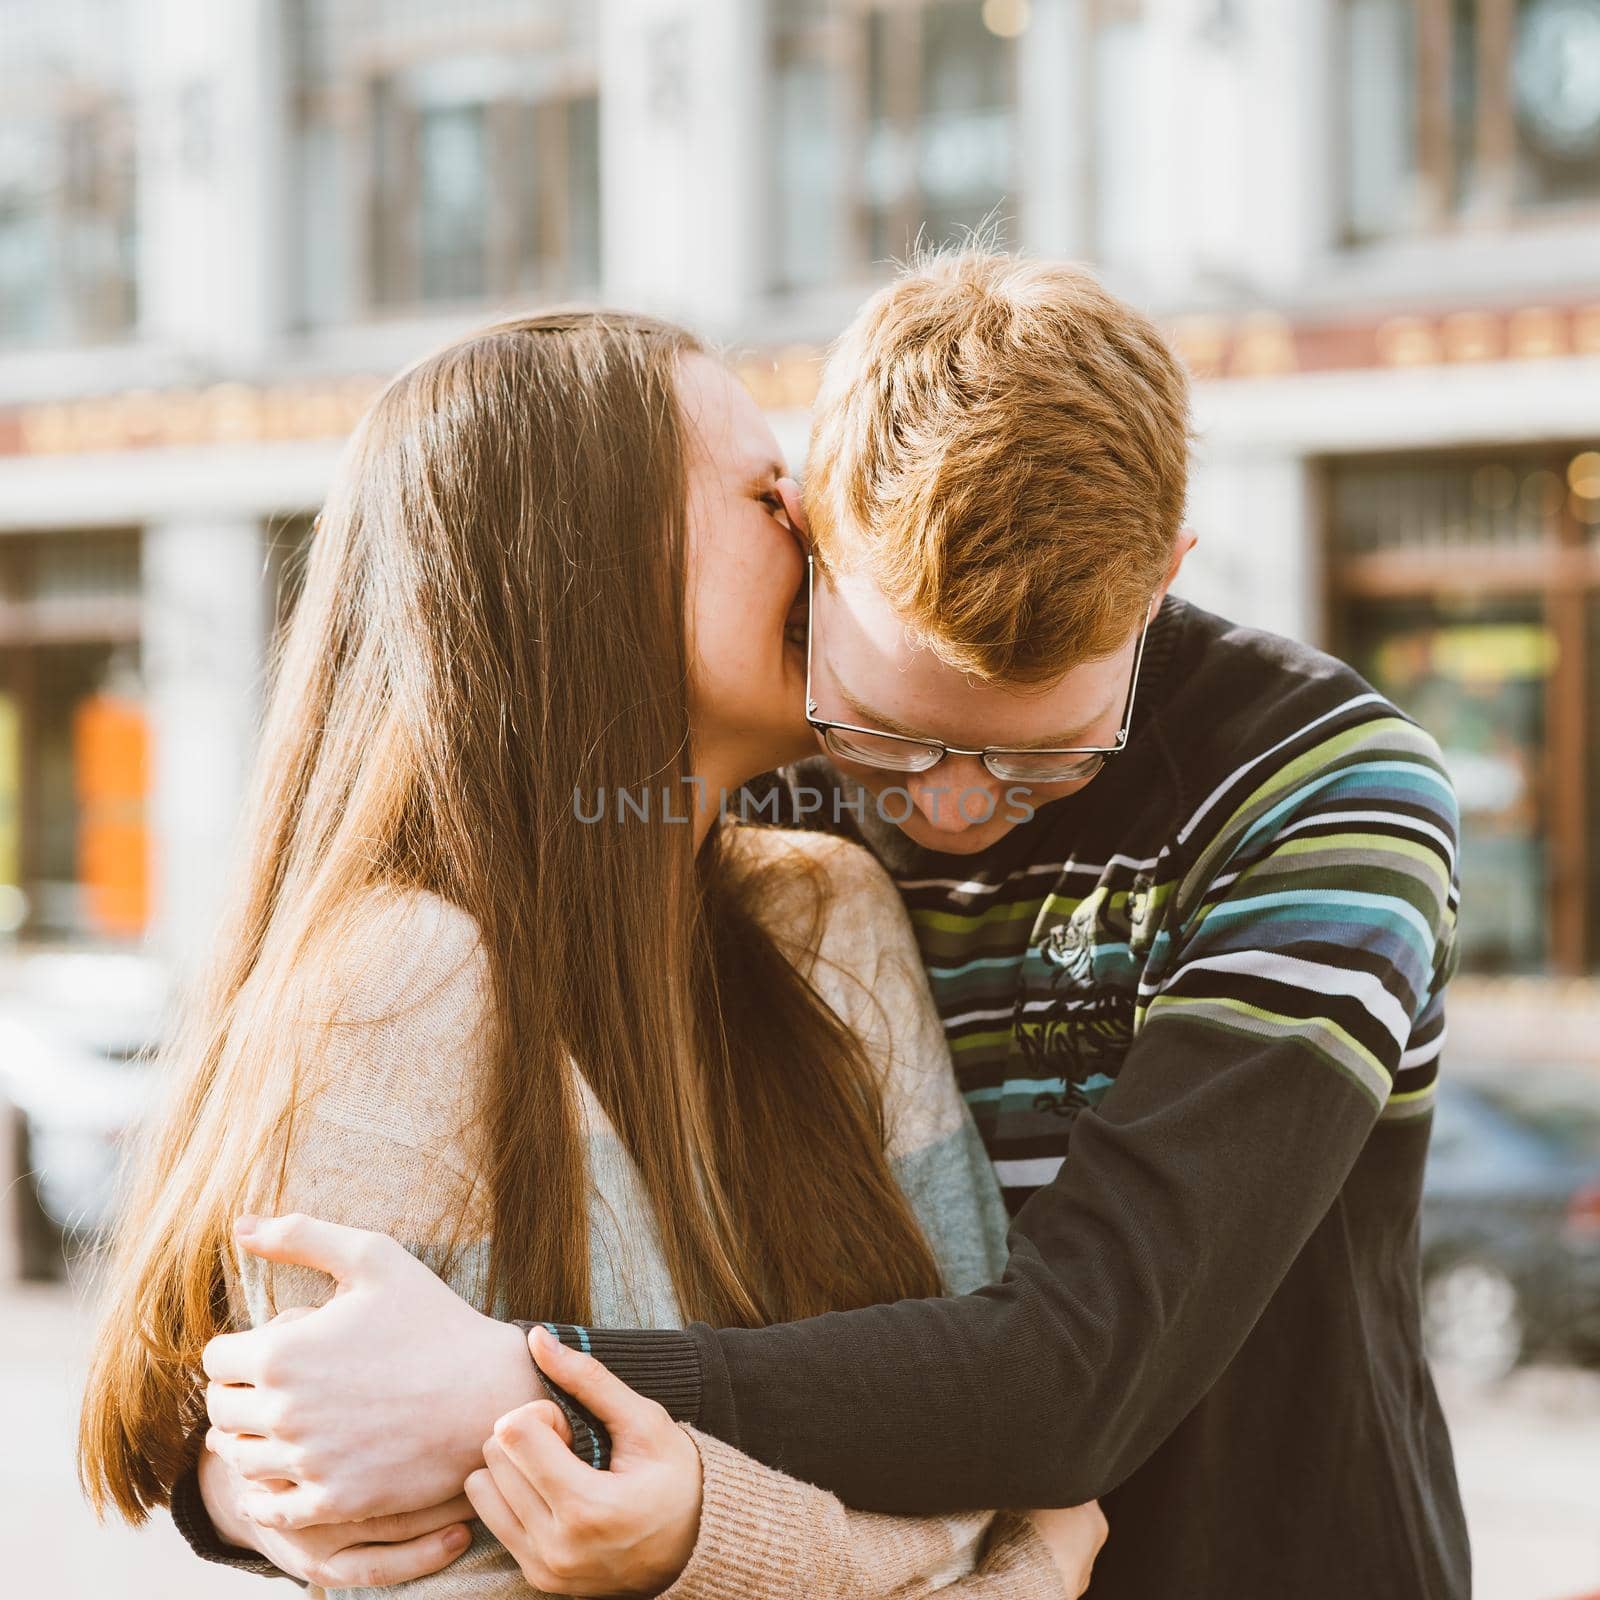 Portrait of happy couple embracing in downtown, red-haired man with glasses kisses and woman with long hair. Girl whispers in ear of guy. Concept of teenage love and first kiss, love, relationship, couple. City, waterfront. by NataBene